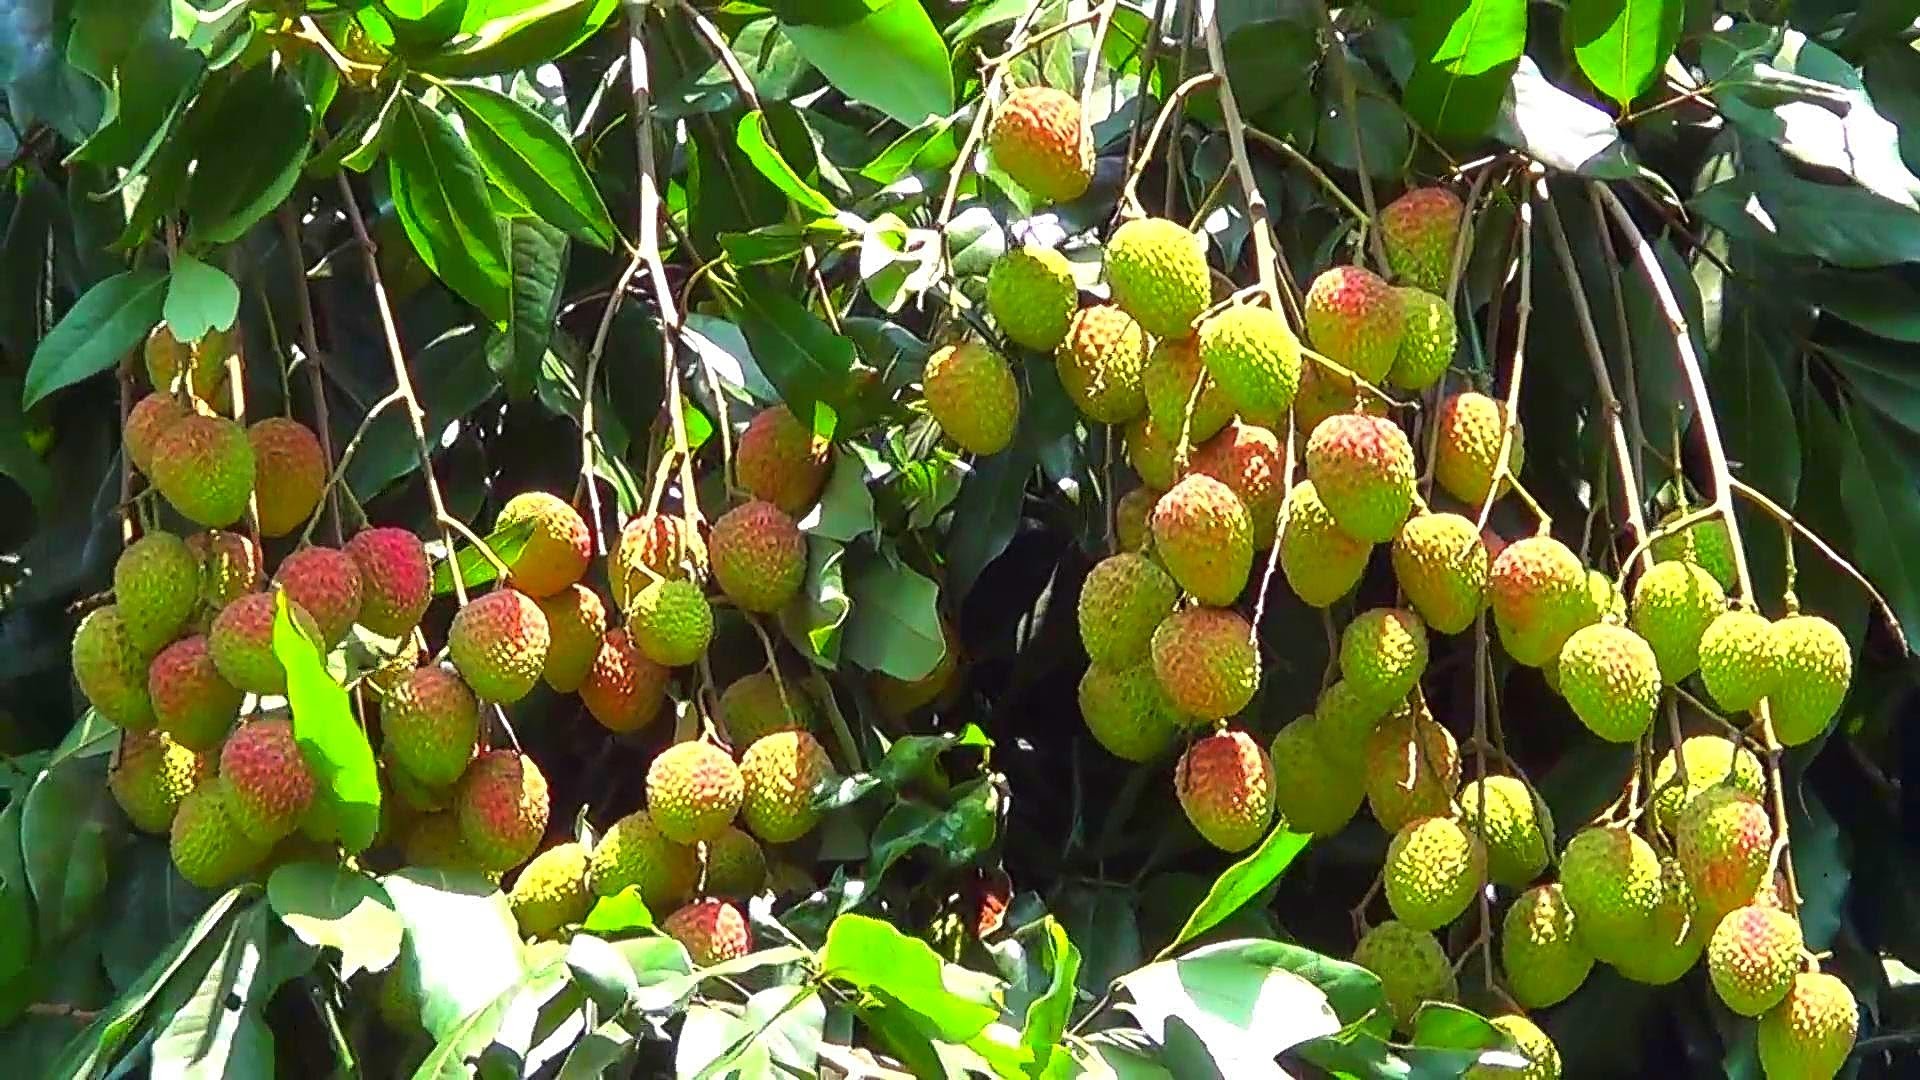 Most Popular Fruit In The World- Lychee / Litchi - YouTube